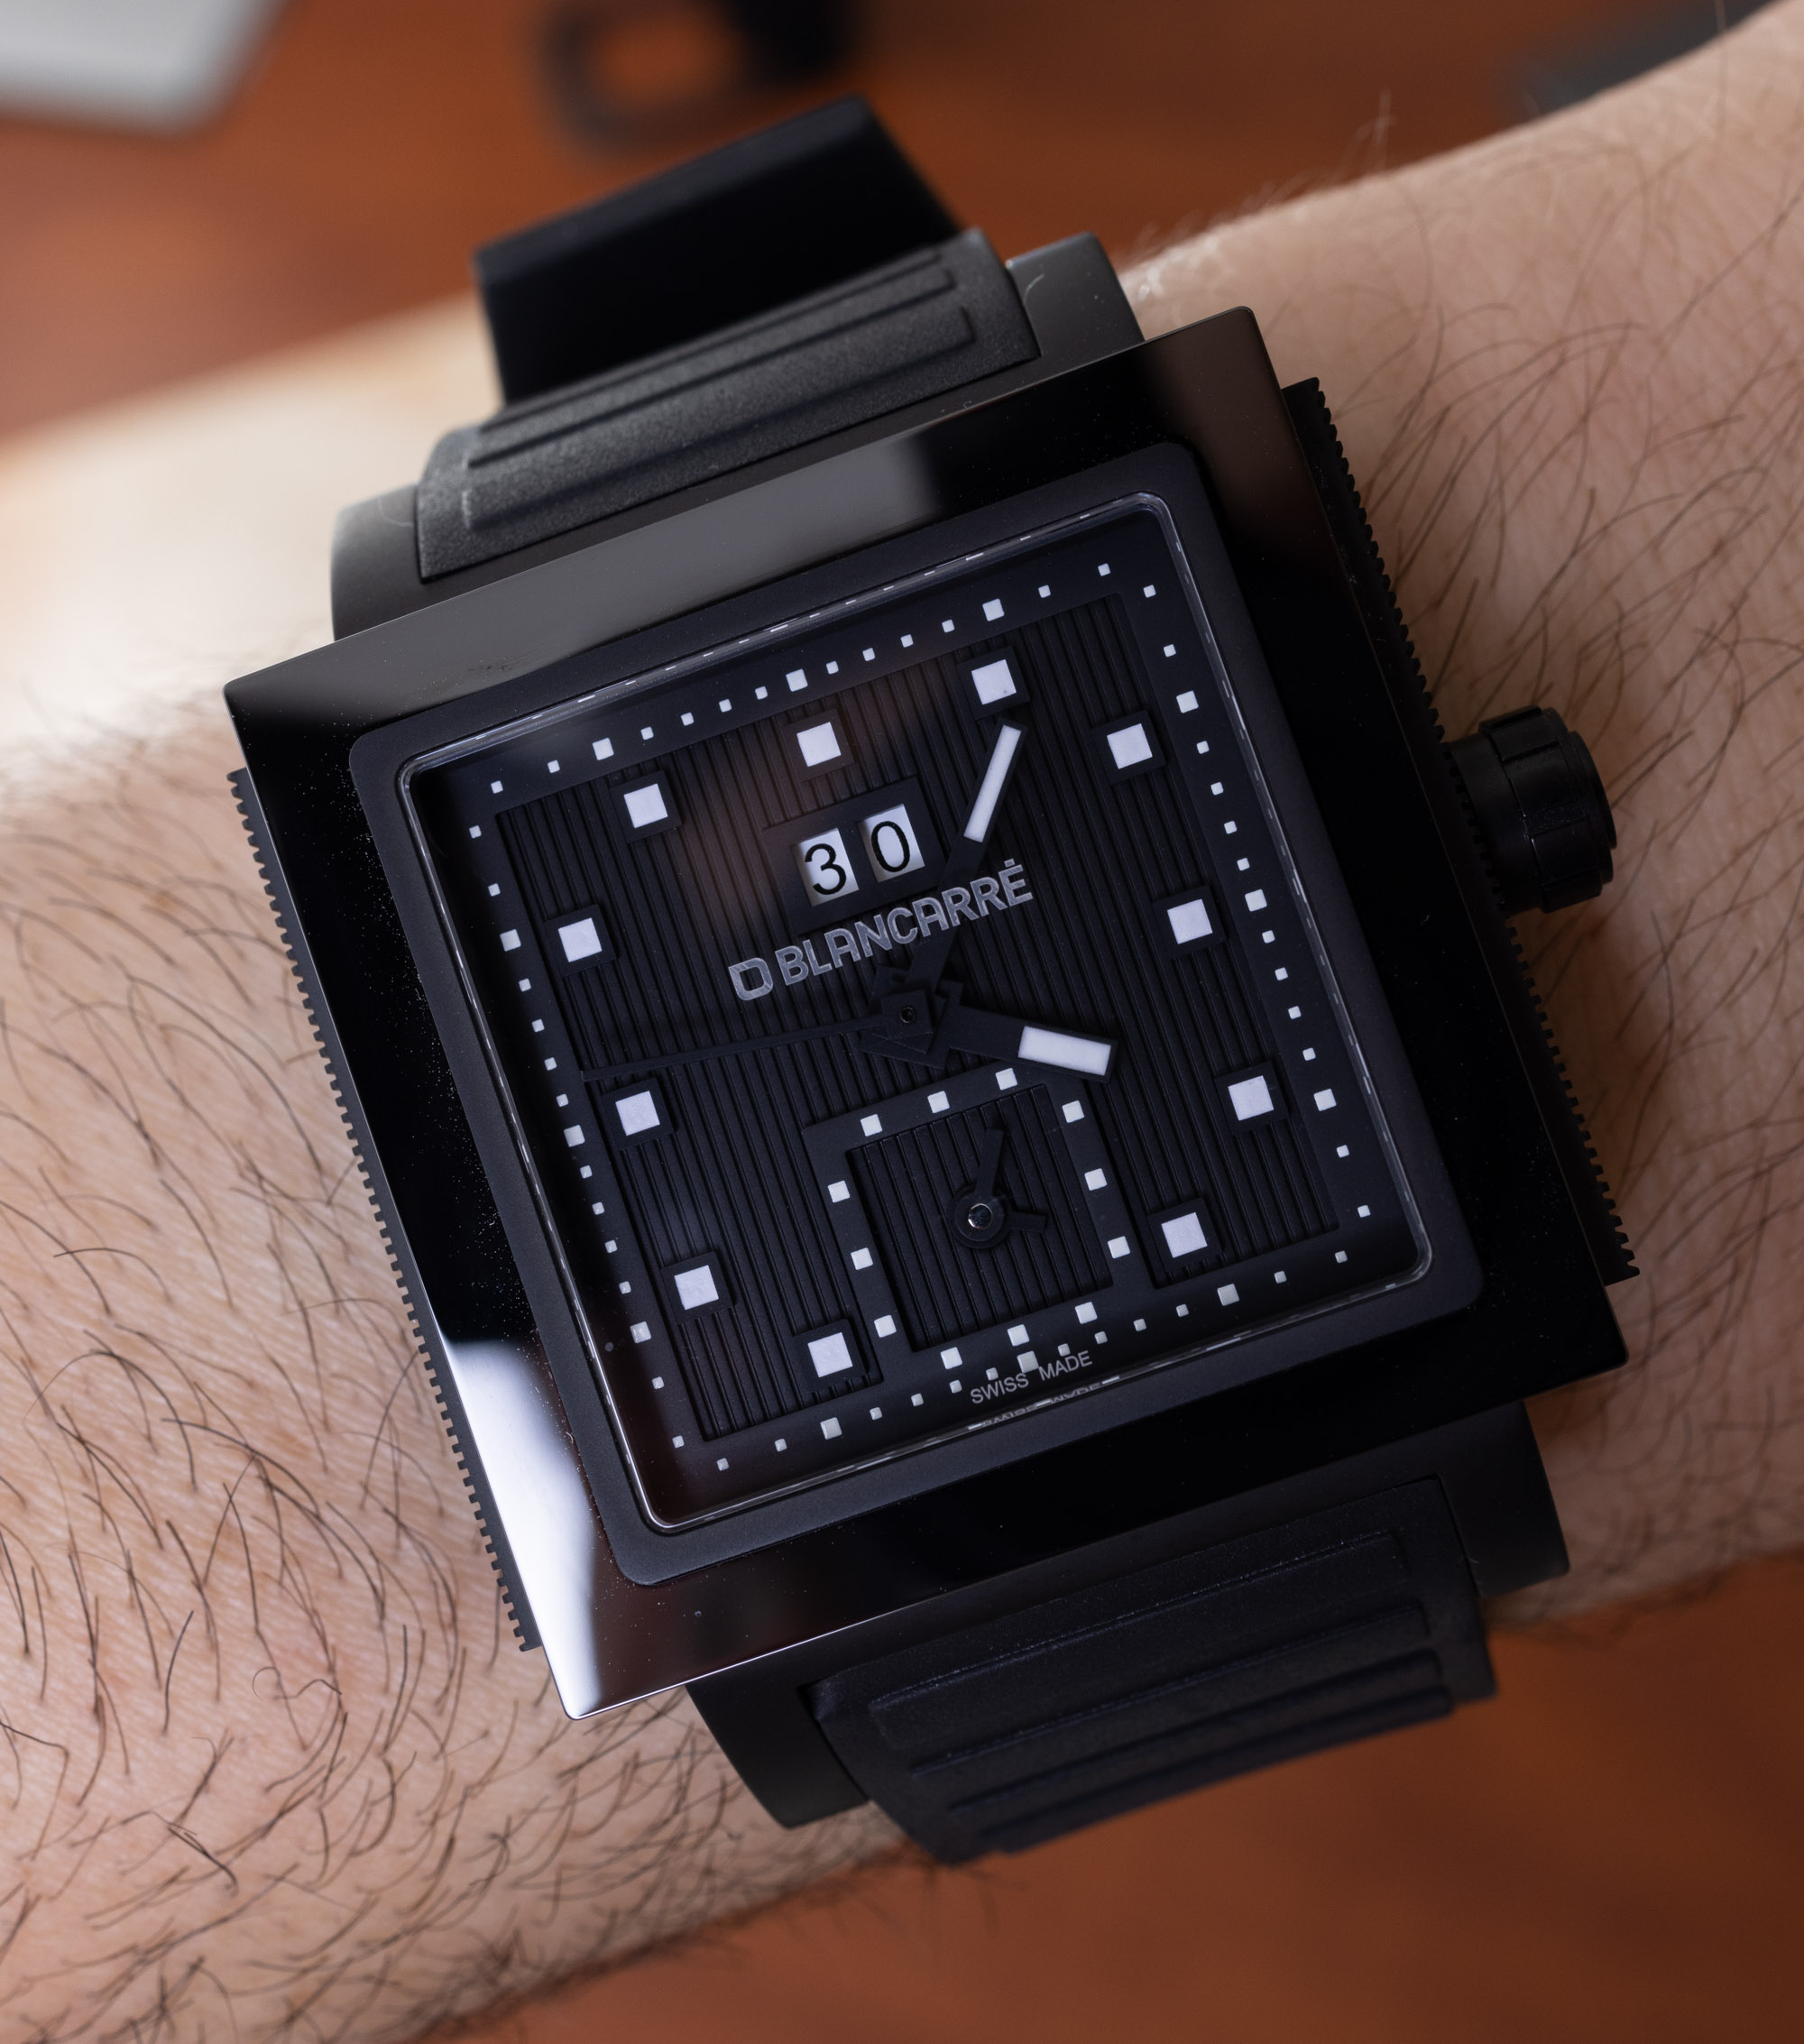 No Longer Made: Blancarre Solid Black Square Watch